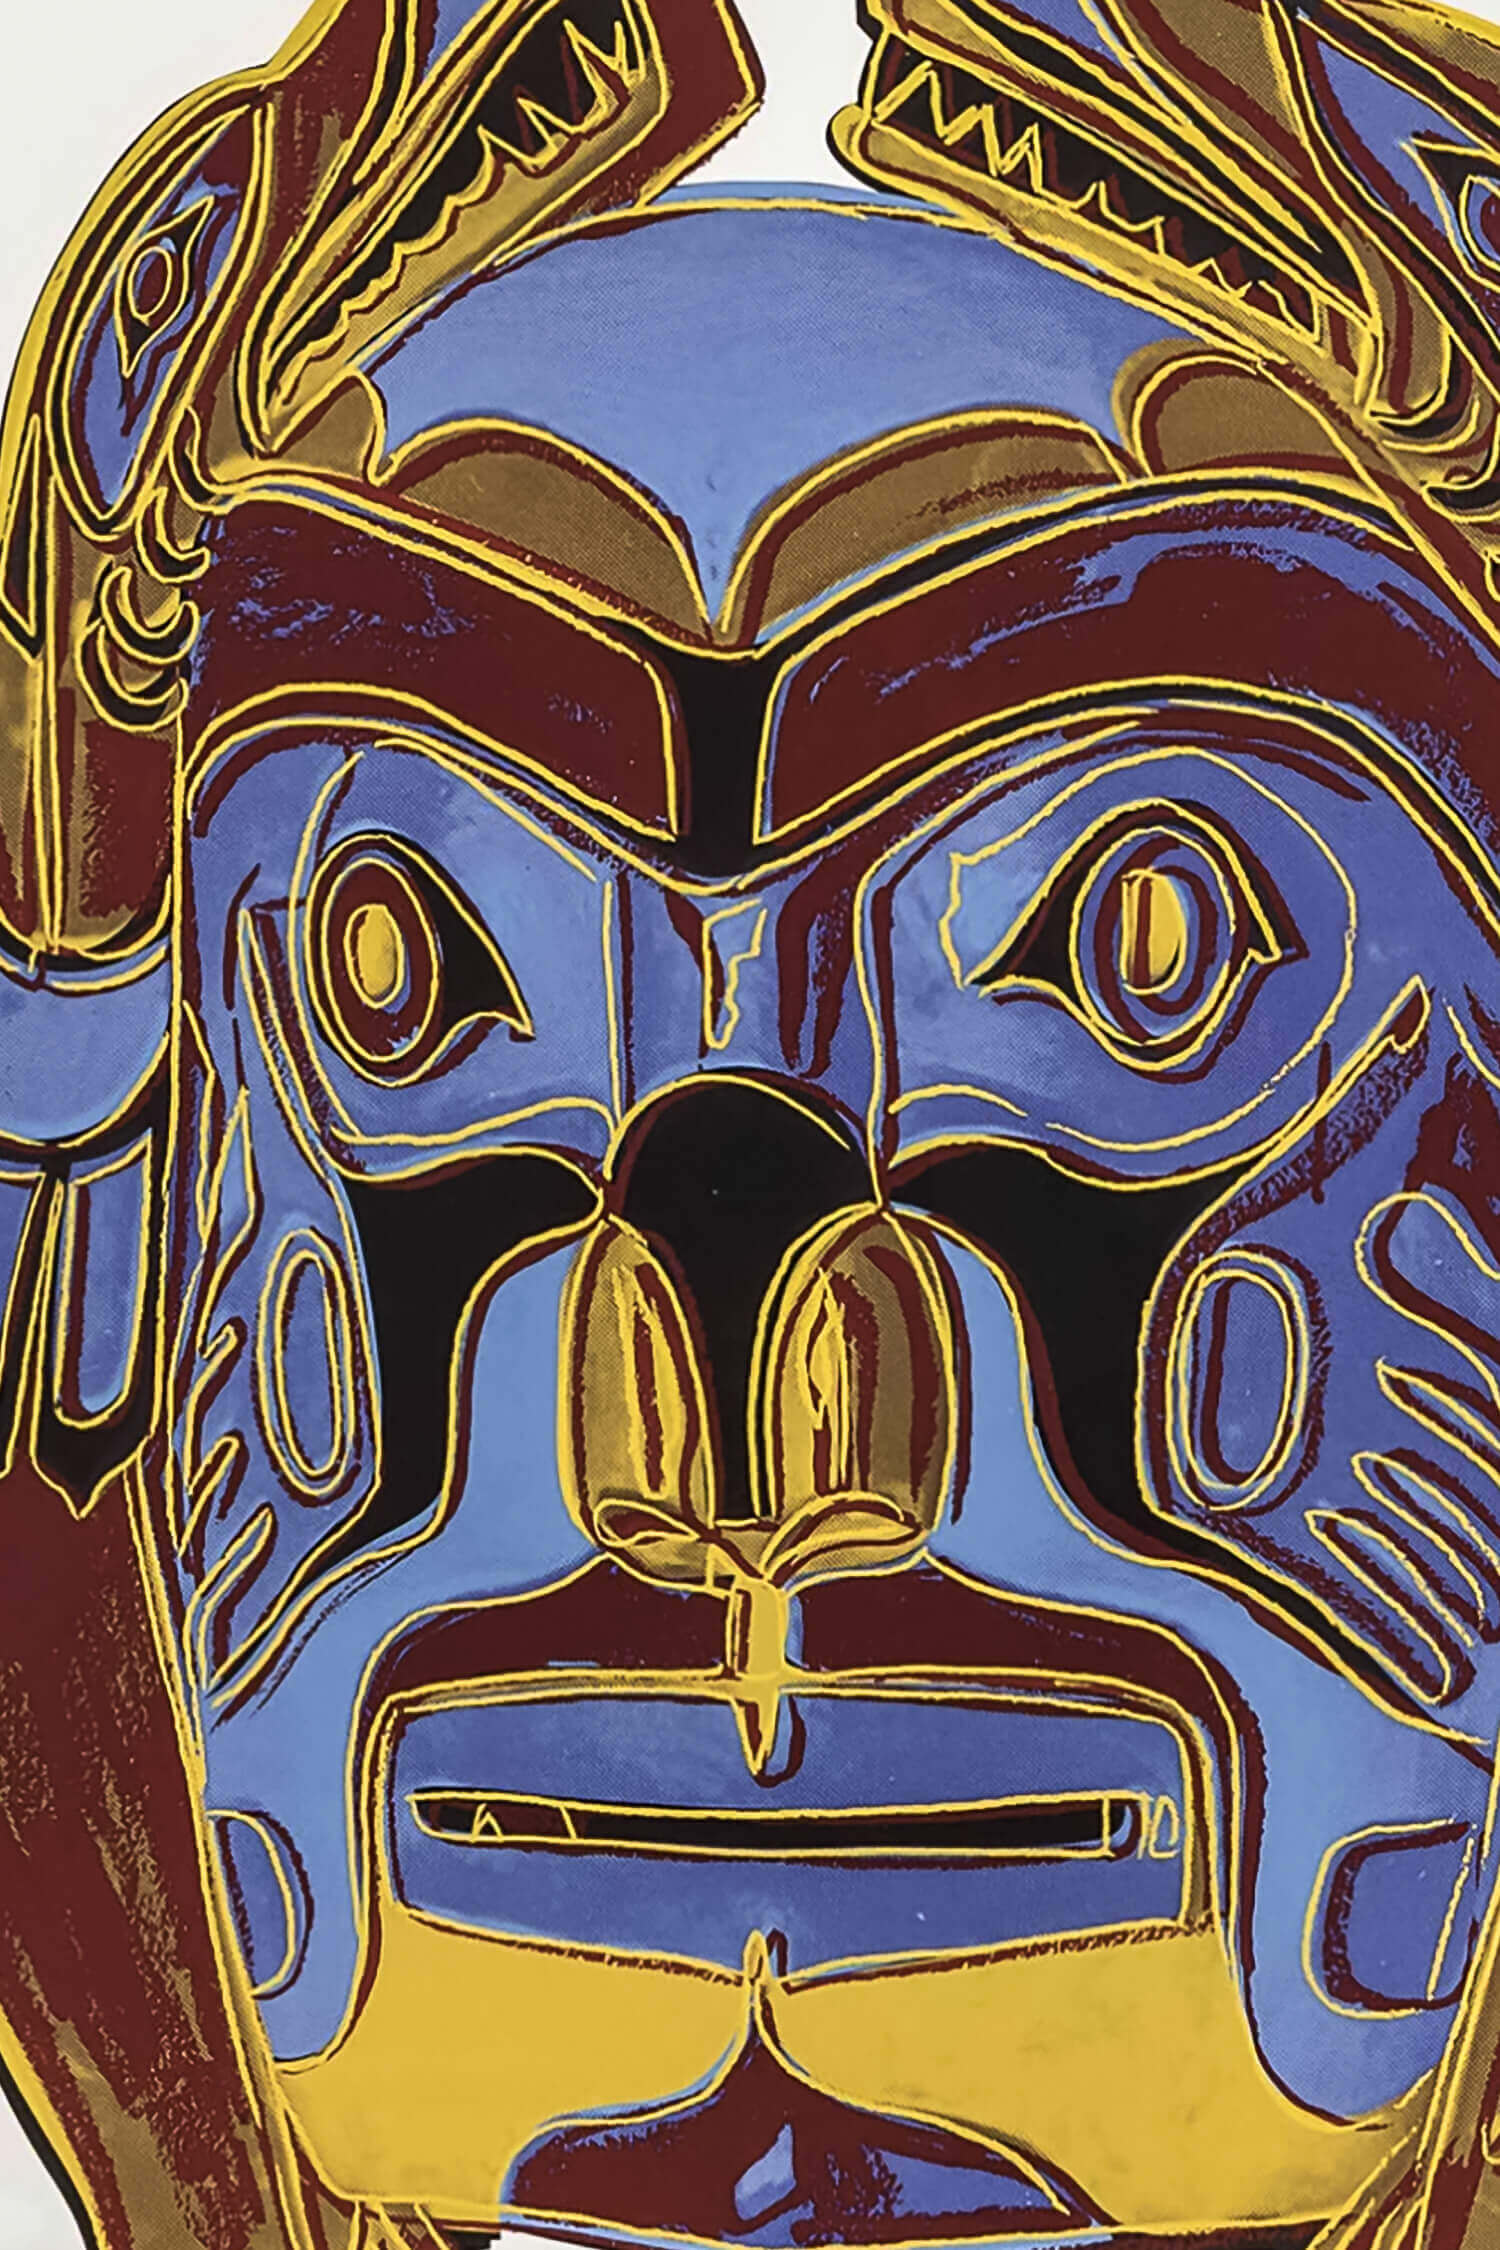 Andy Warhol | Northwest Coast Mask from Cowboys and Indians